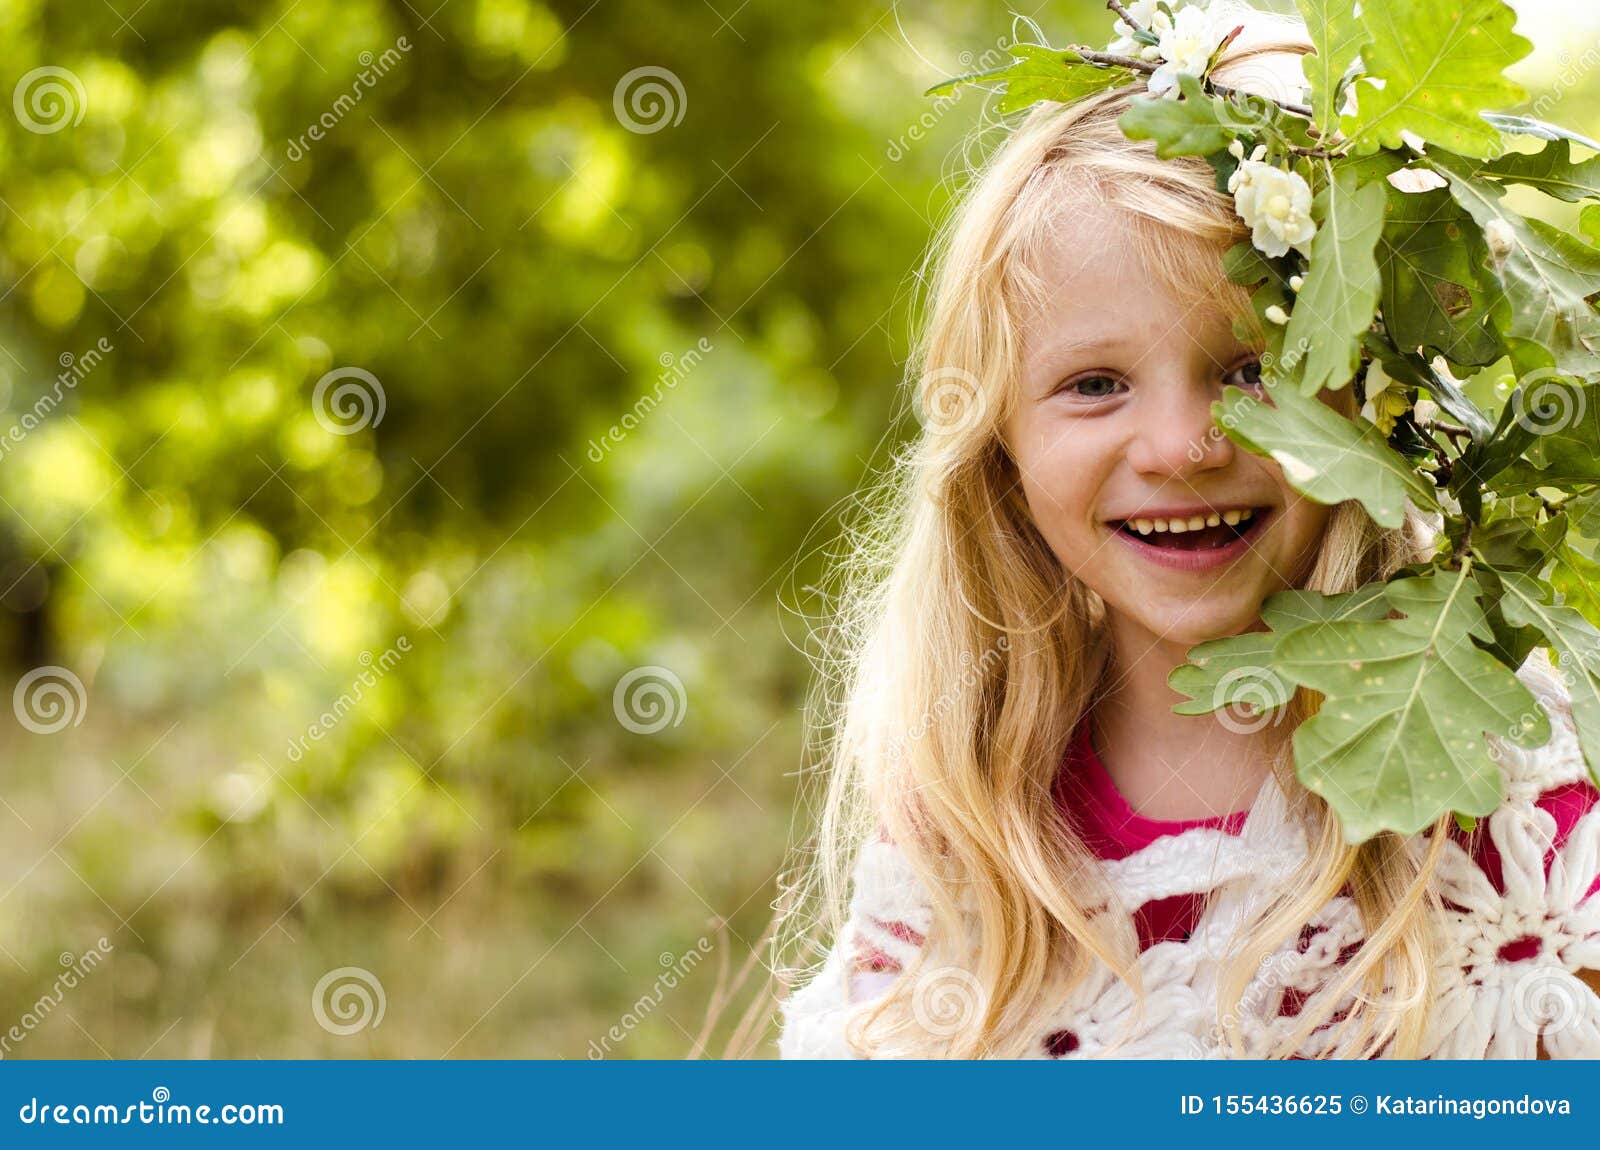 Adorable Smiling Girl with Long Blond Hair Stock Image - Image of laugh ...